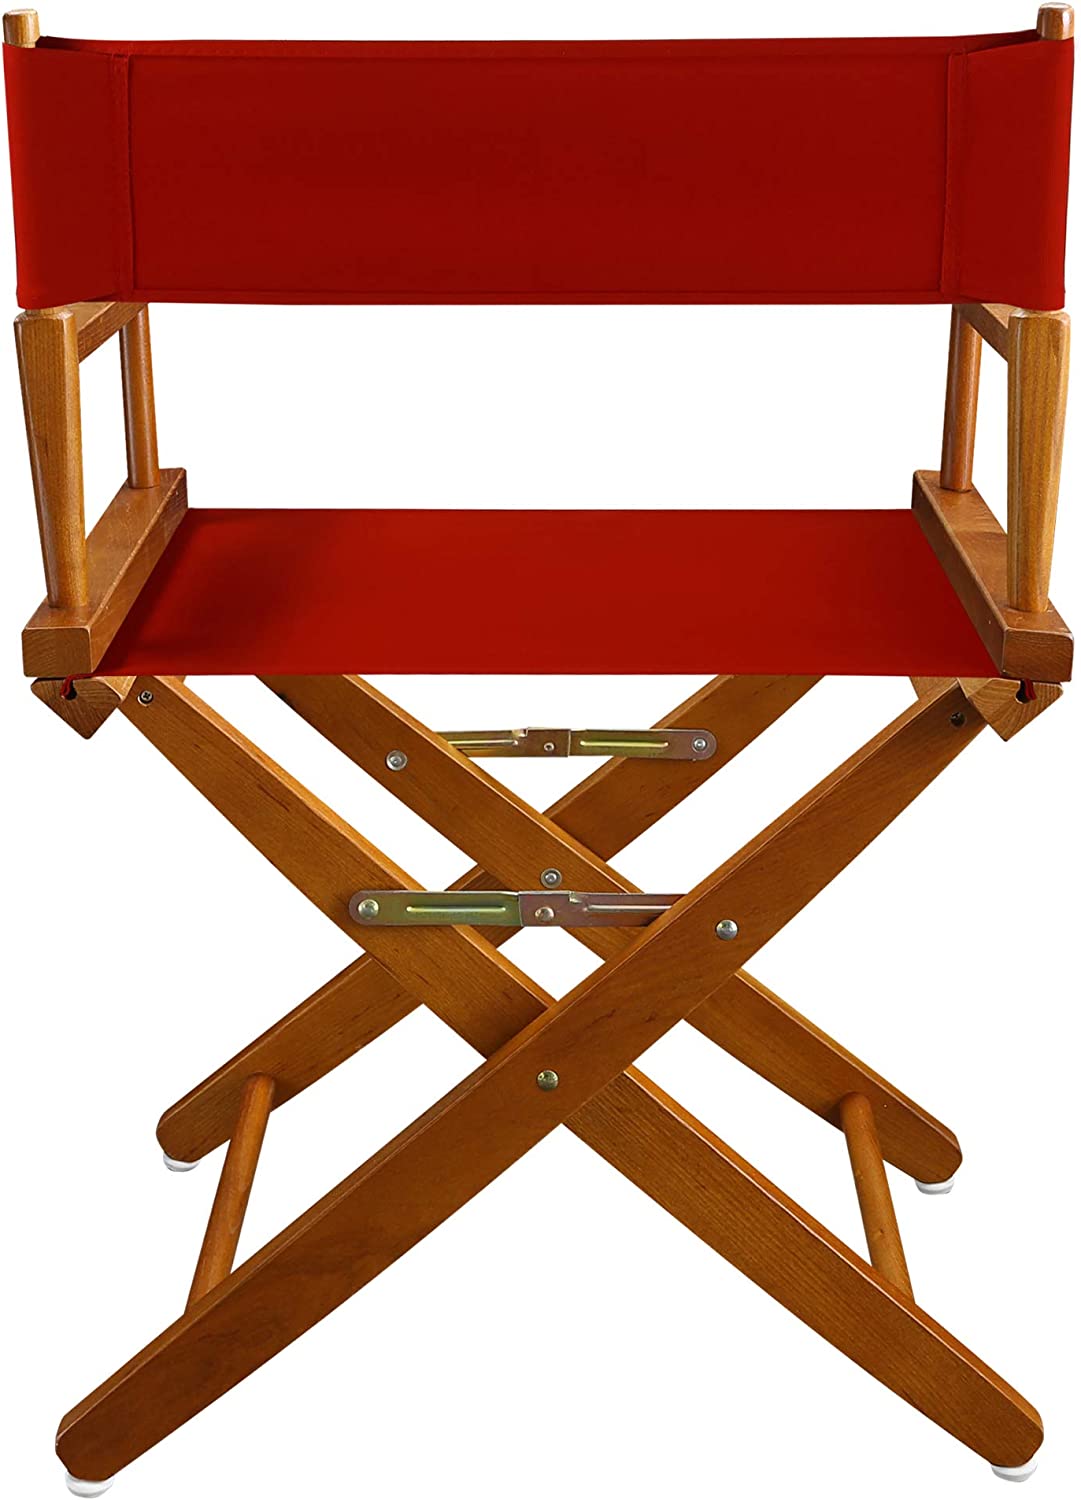 American Trails Extra-Wide Premium 18" Director's Chair Mission Oak Frame with Red Canvas